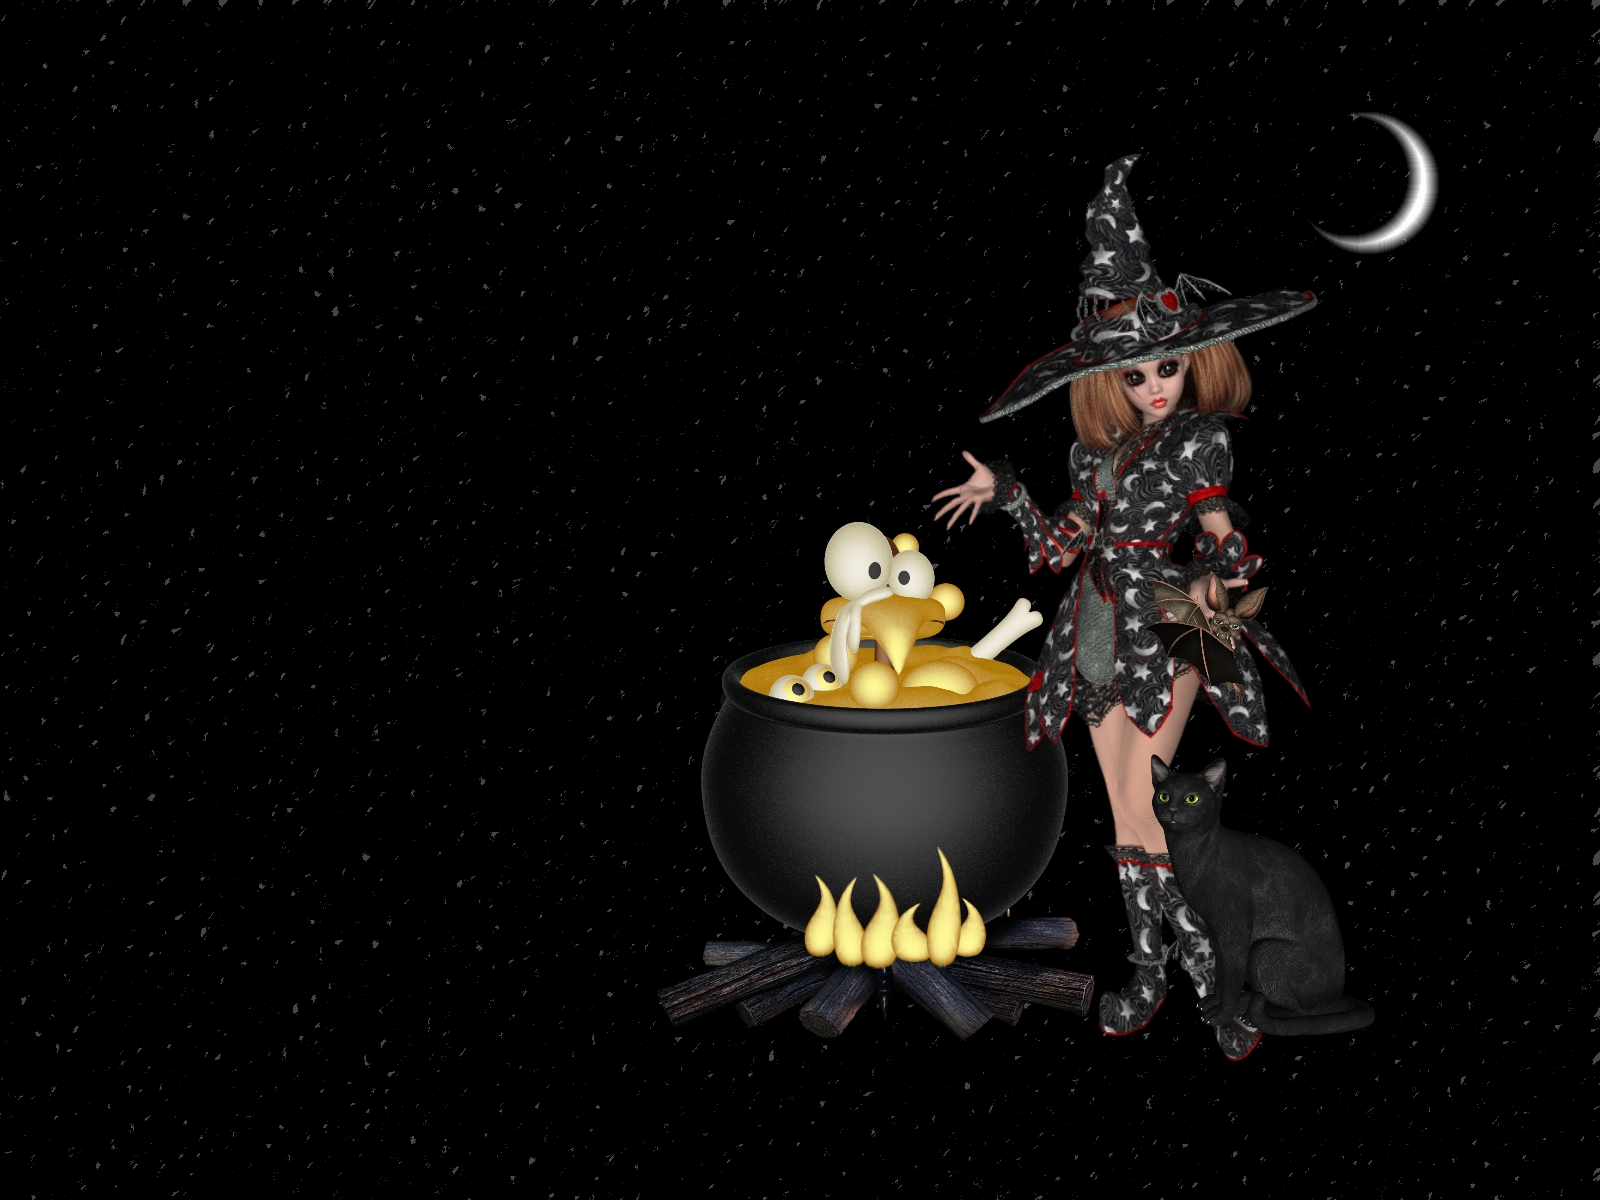 animated halloween wallpaper,cauldron,cookware and bakeware,animation,fictional character,illustration